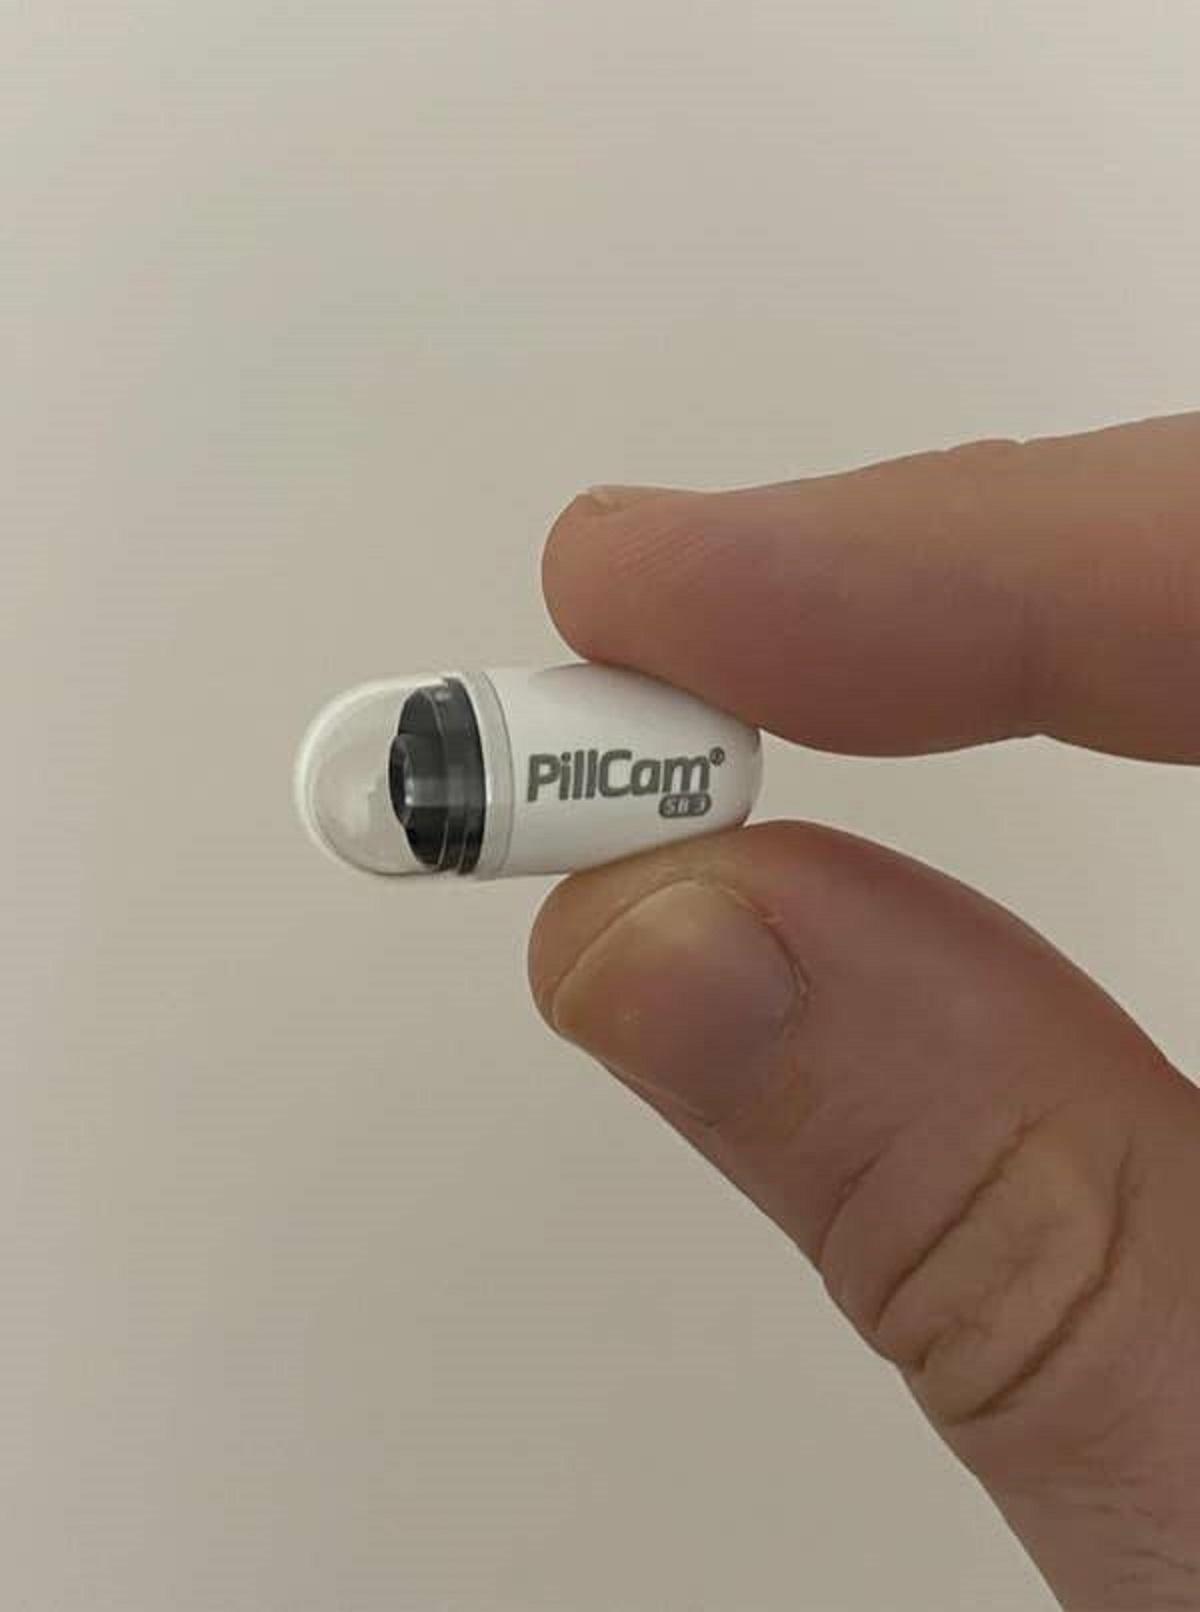 This is a tiny, pill-size camera that you swallow so that doctors can get a...well, a very intimate look at your digestive system: